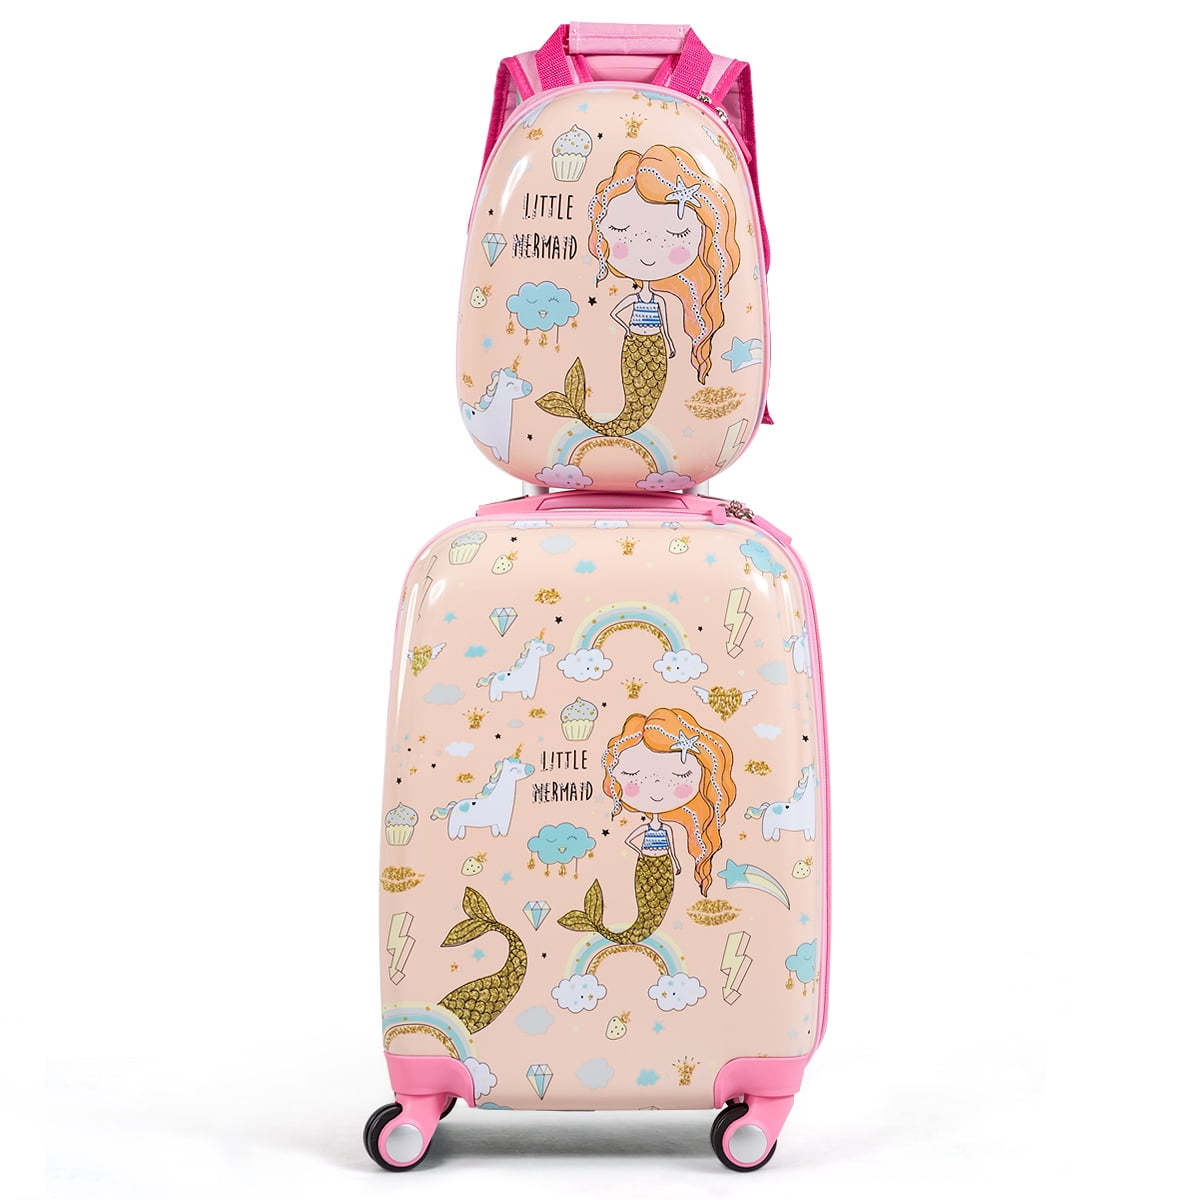 Disney Princess Ride on Suitcase for Kids, 18'' Suitcase with Seat